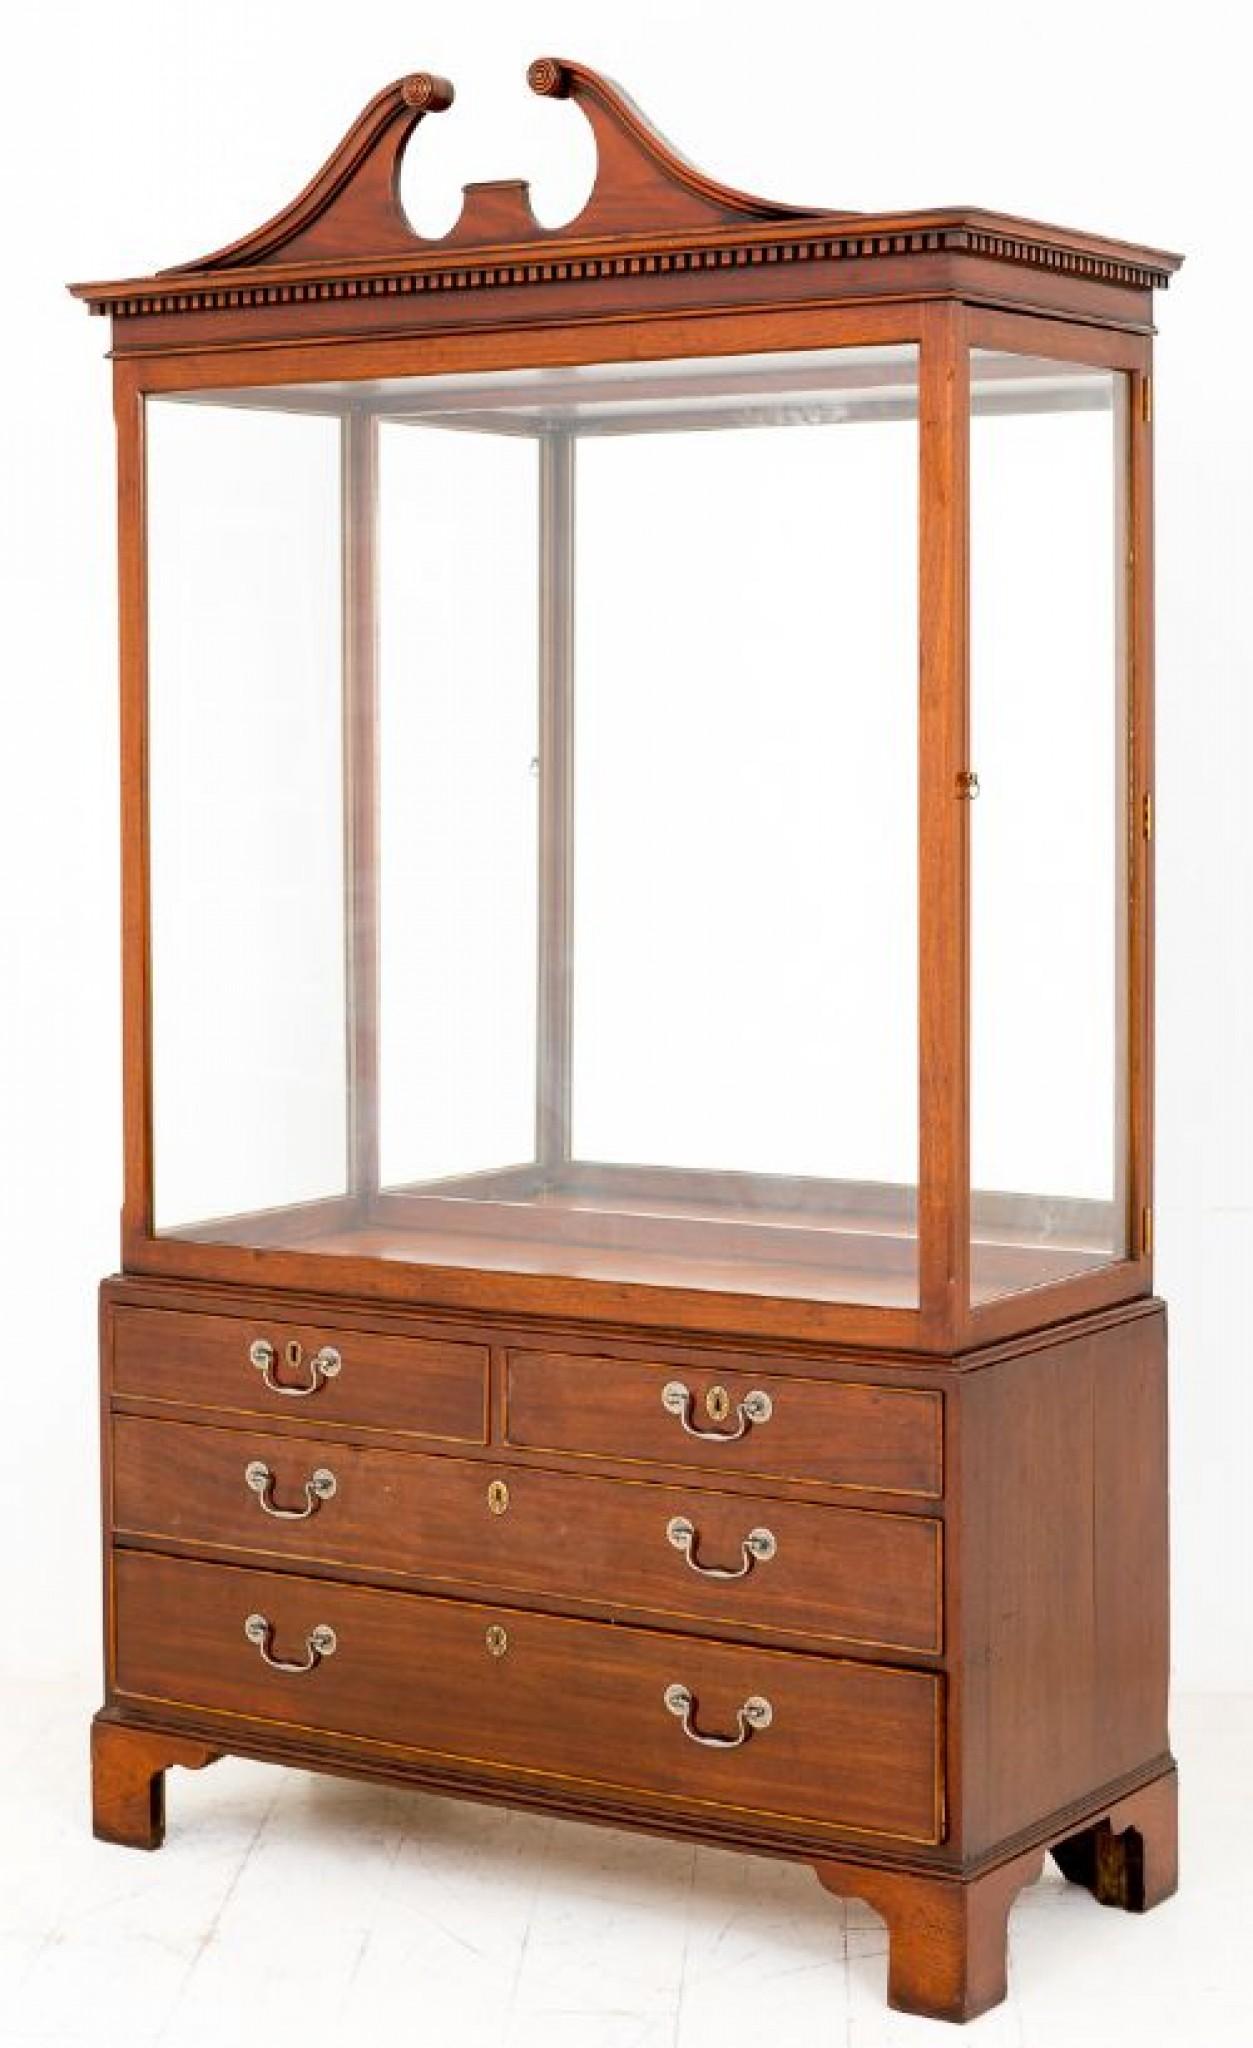 Antique Display Cabinet - Georgian Mahogany Specimen 1880 In Good Condition For Sale In Potters Bar, GB